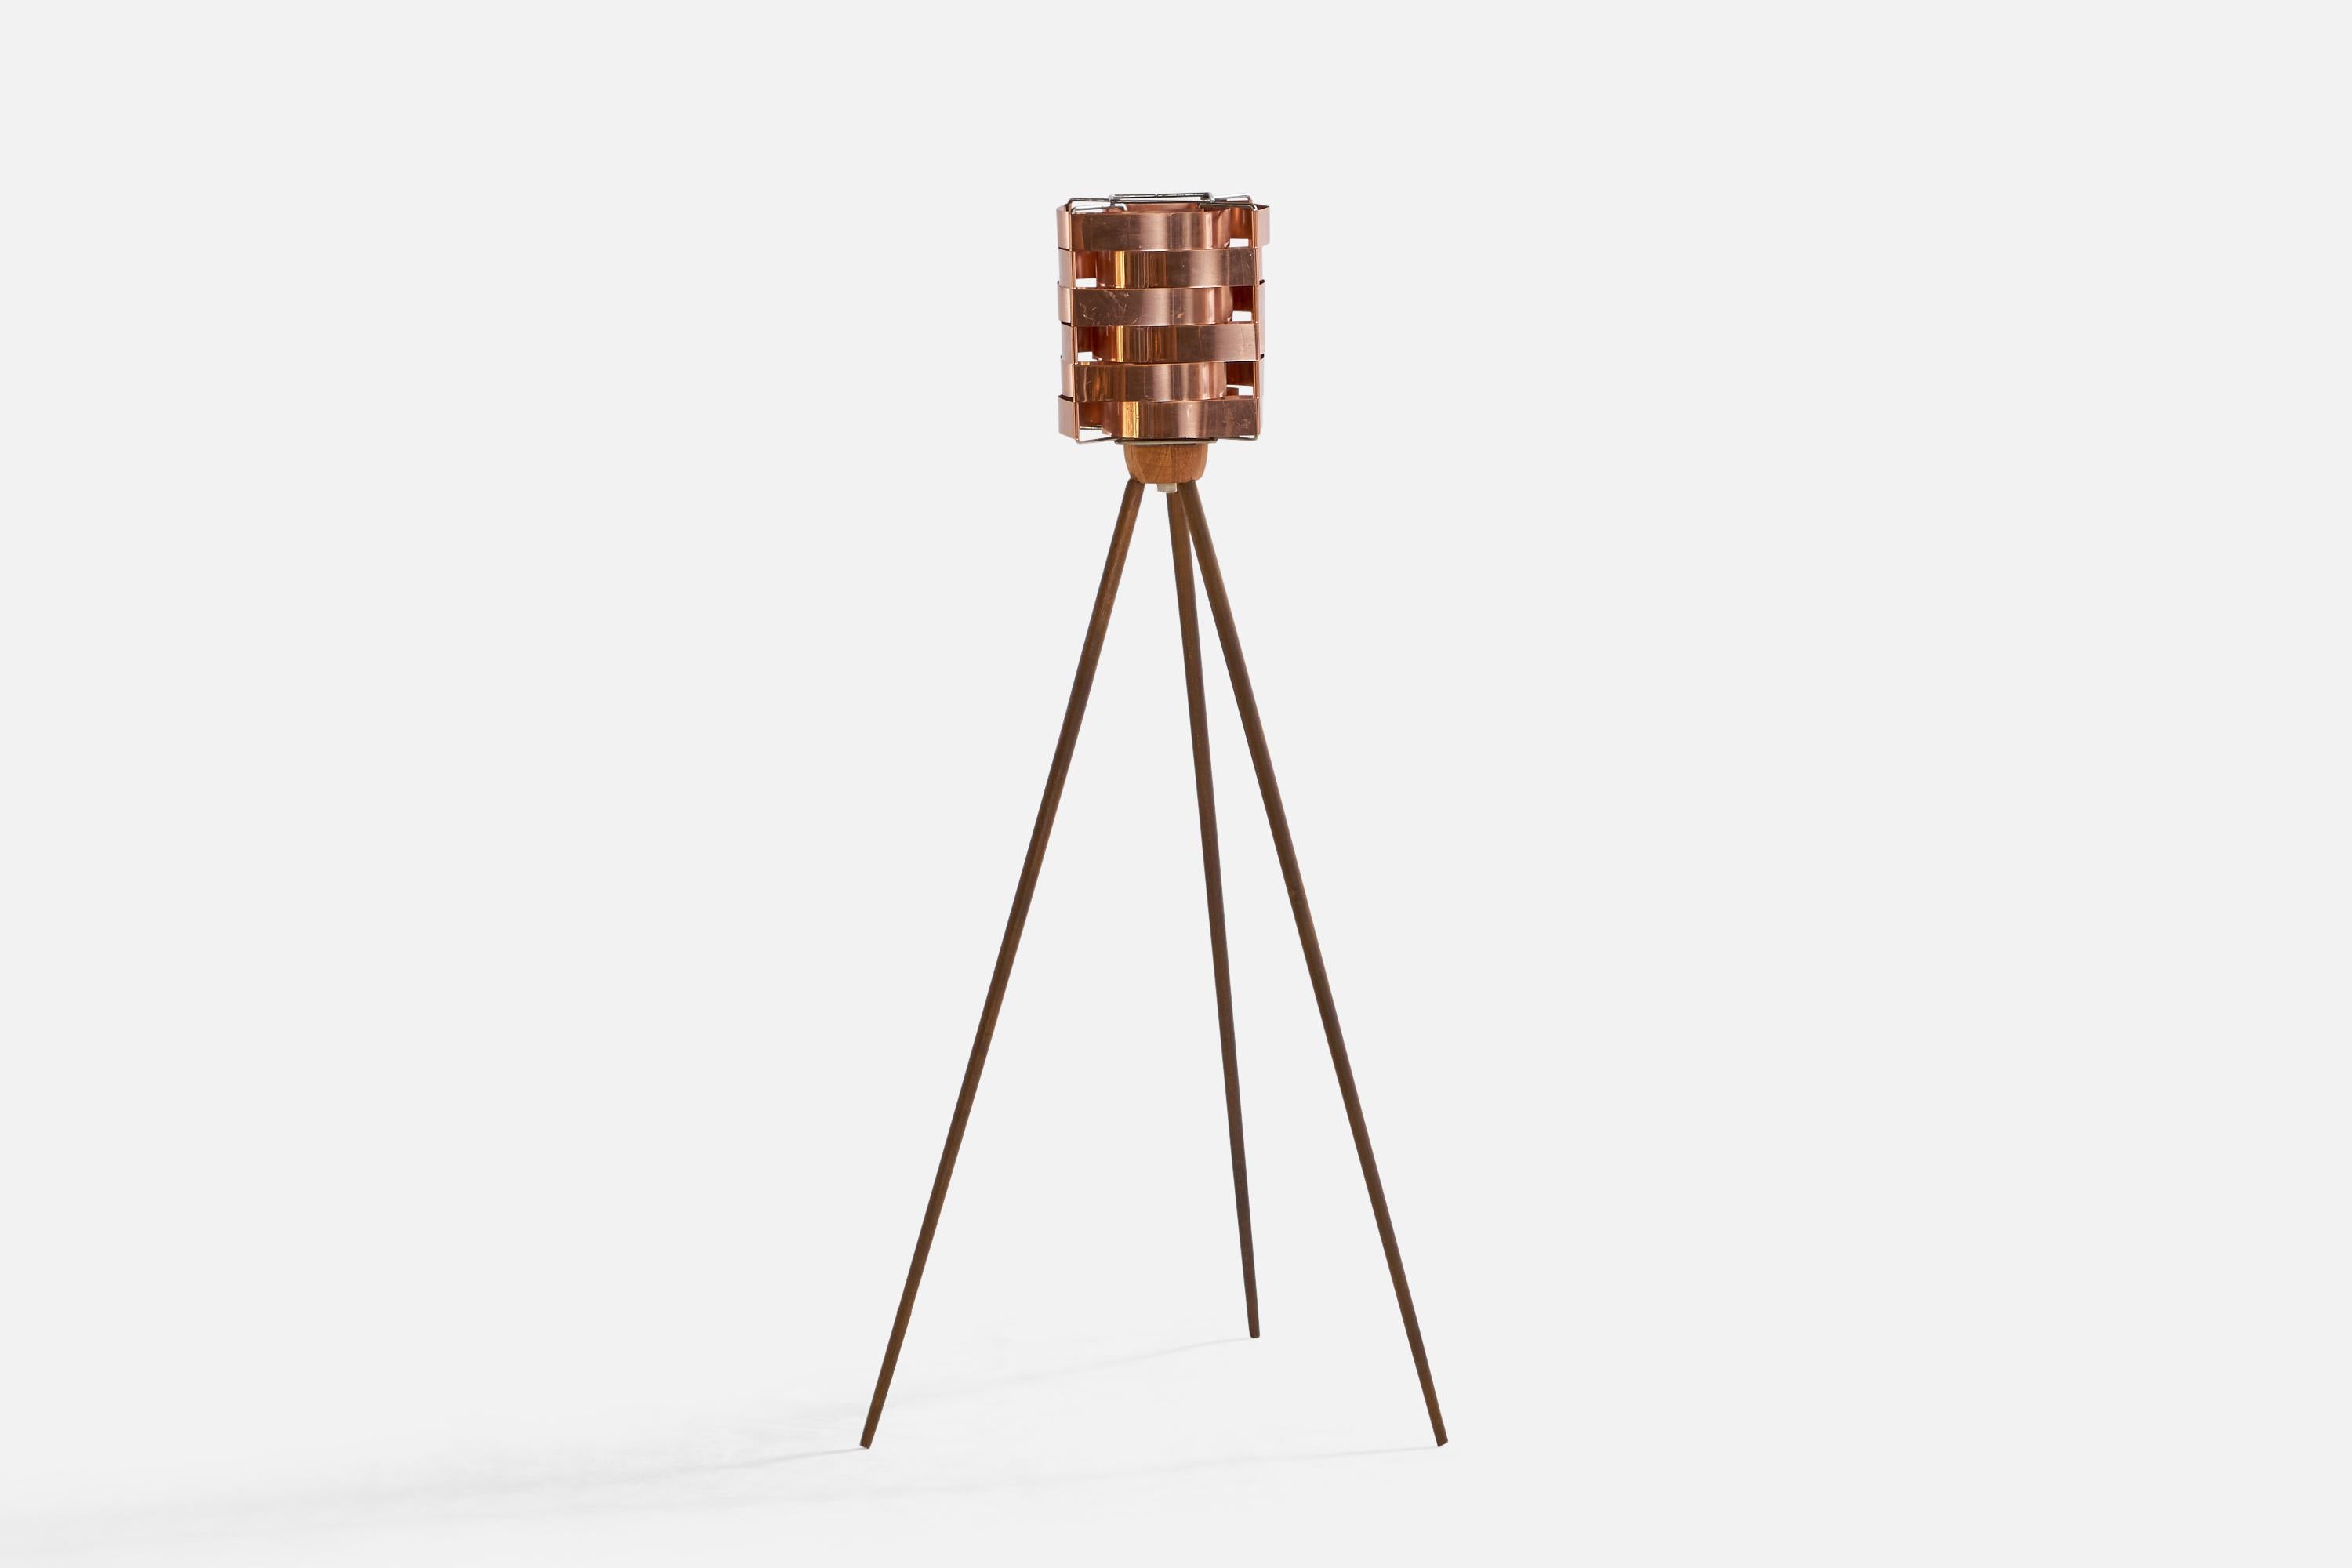 A small teak and copper floor lamp designed and produced in Sweden, 1950s.

Note cord feeds from underside of socket.

Overall Dimensions (inches): 39.75” H x 18.75” W x 17” D
Bulb Specifications: E-26 Bulb
Number of Sockets: 1
All lighting will be